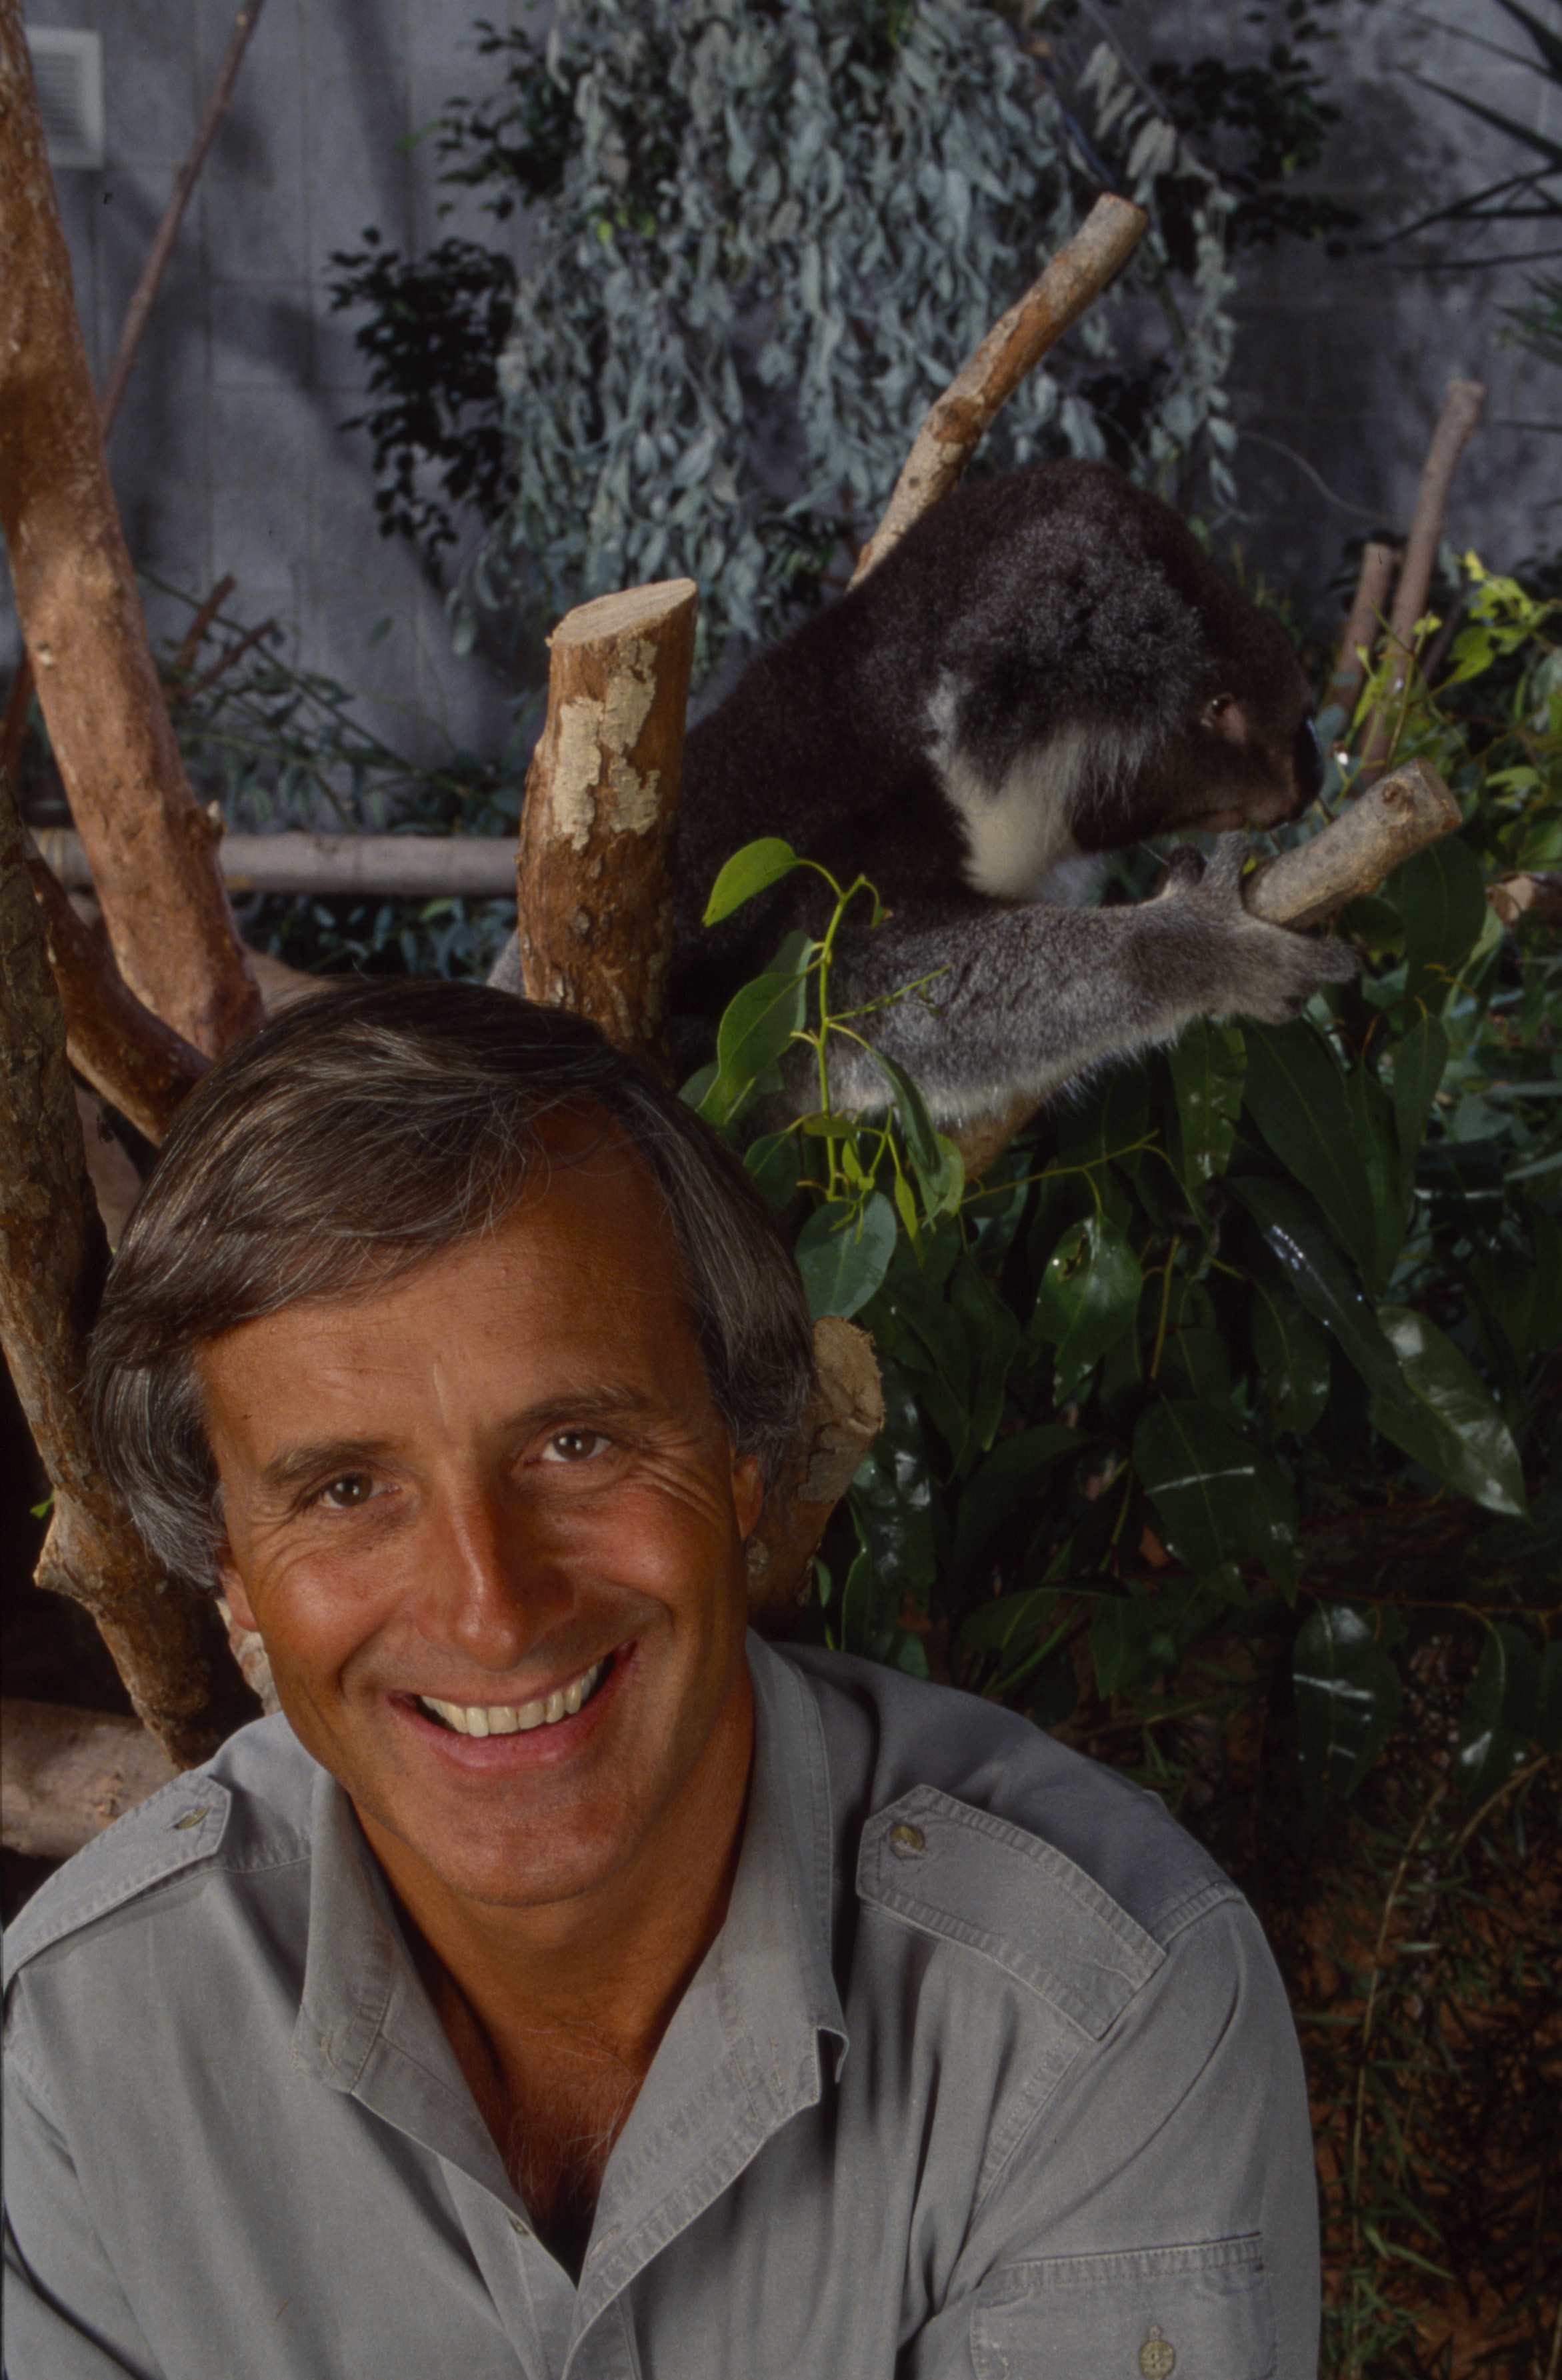 Jack Hanna, 1992 | Source: Getty Images